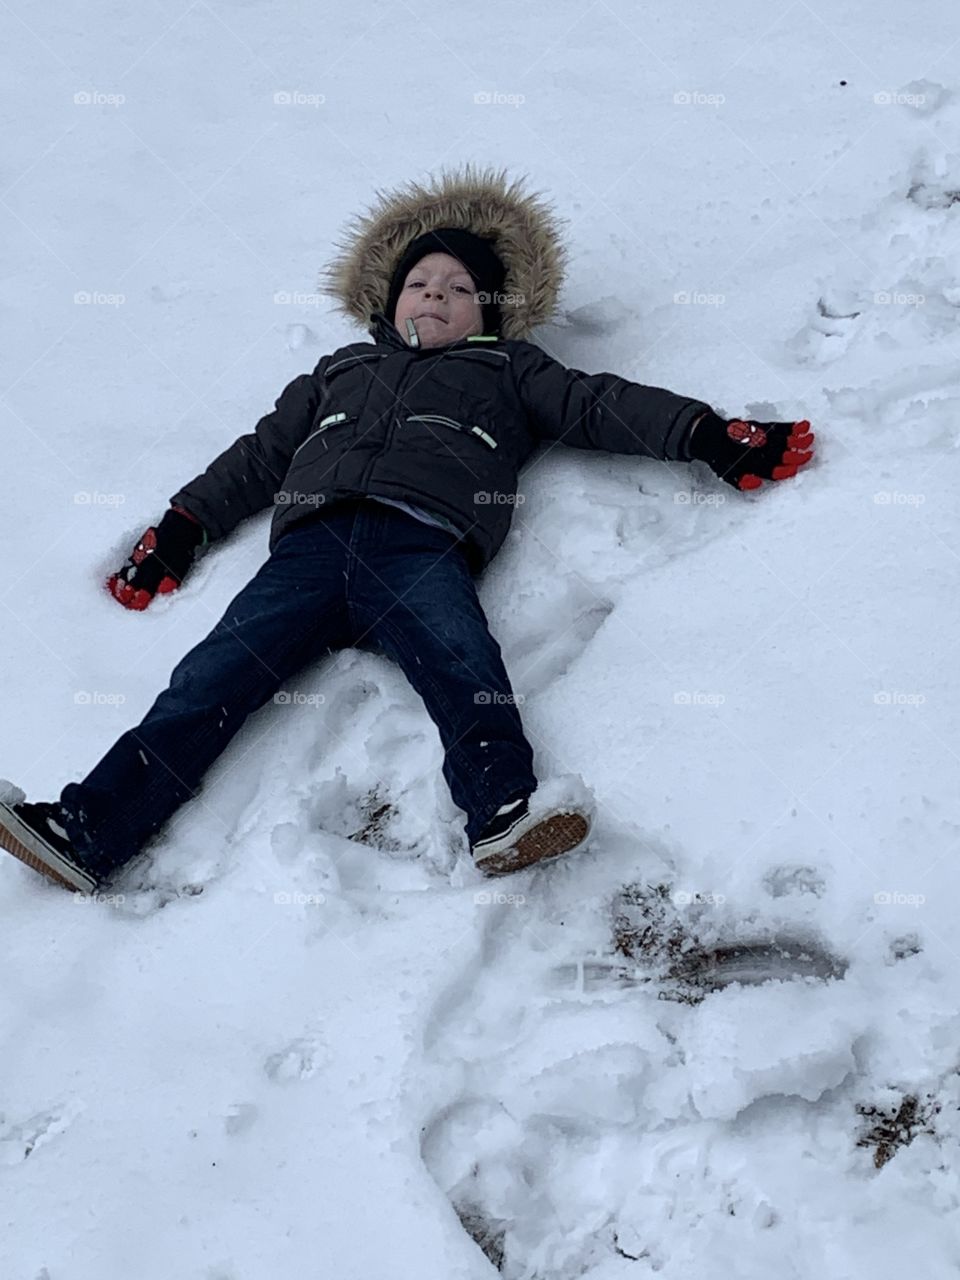 A snow Angel in the making